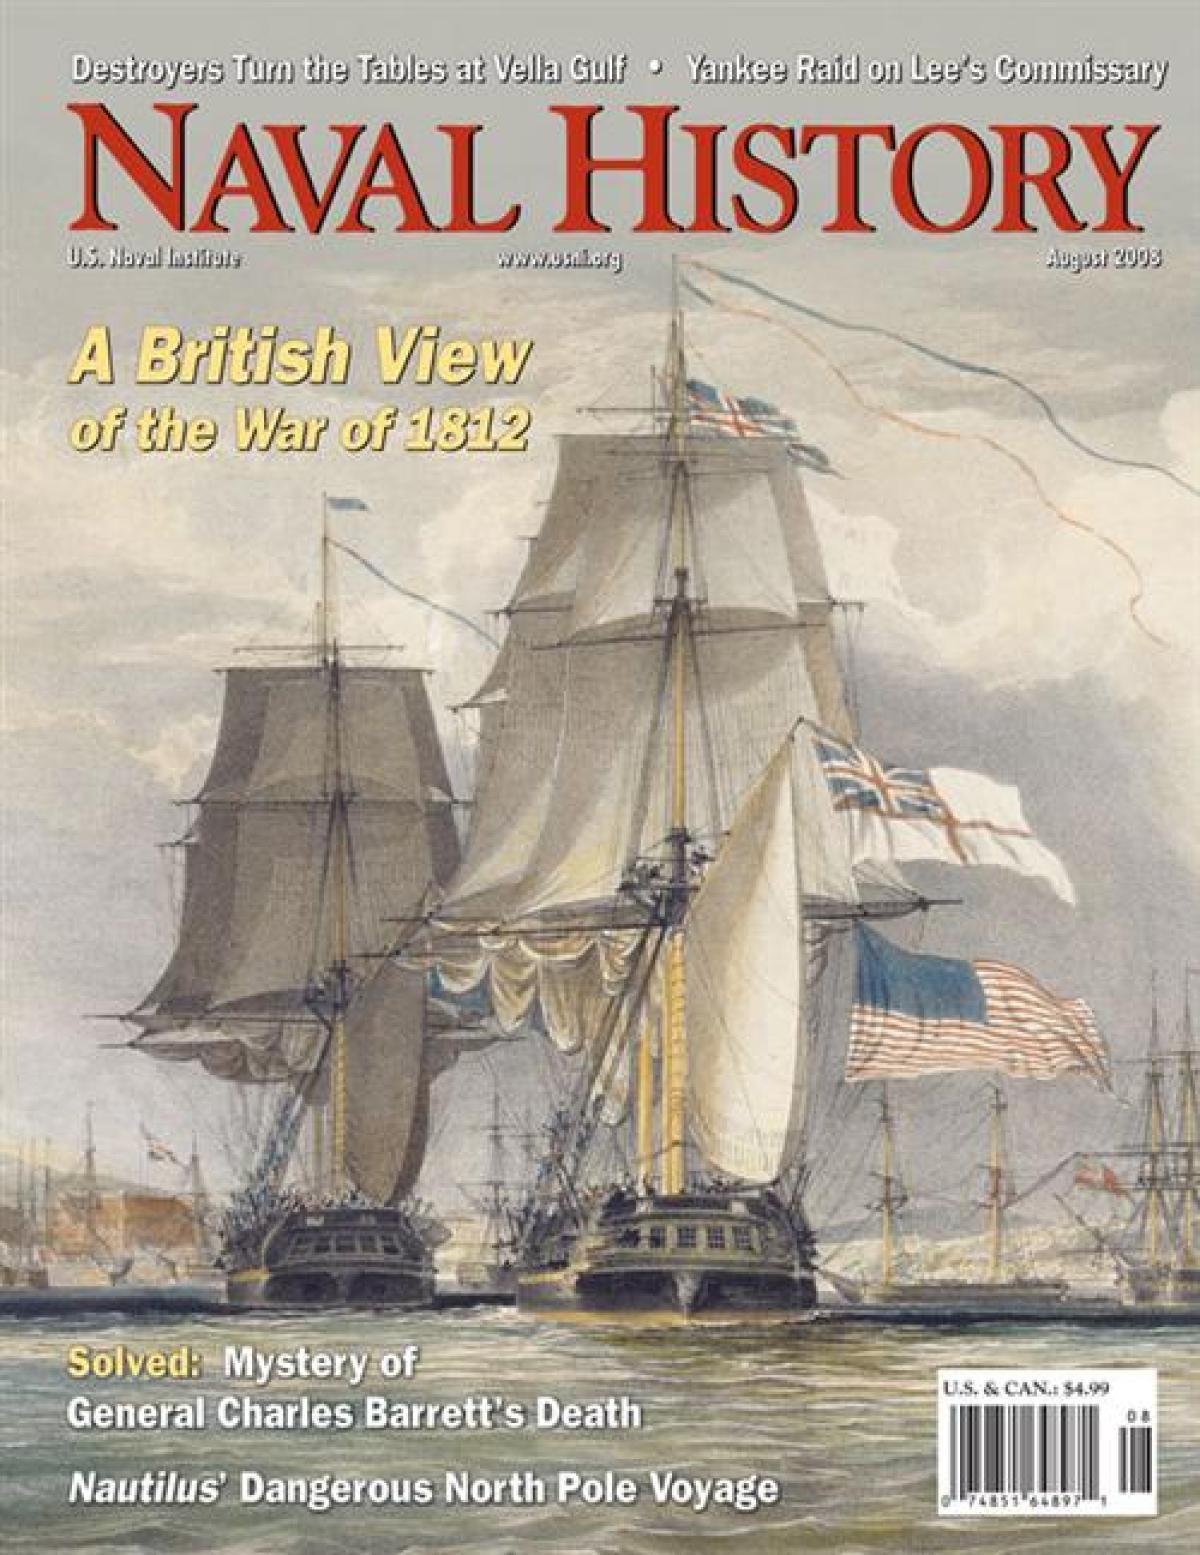 Book Reviews  Naval History Magazine - August 2008 Volume 22, Number 4